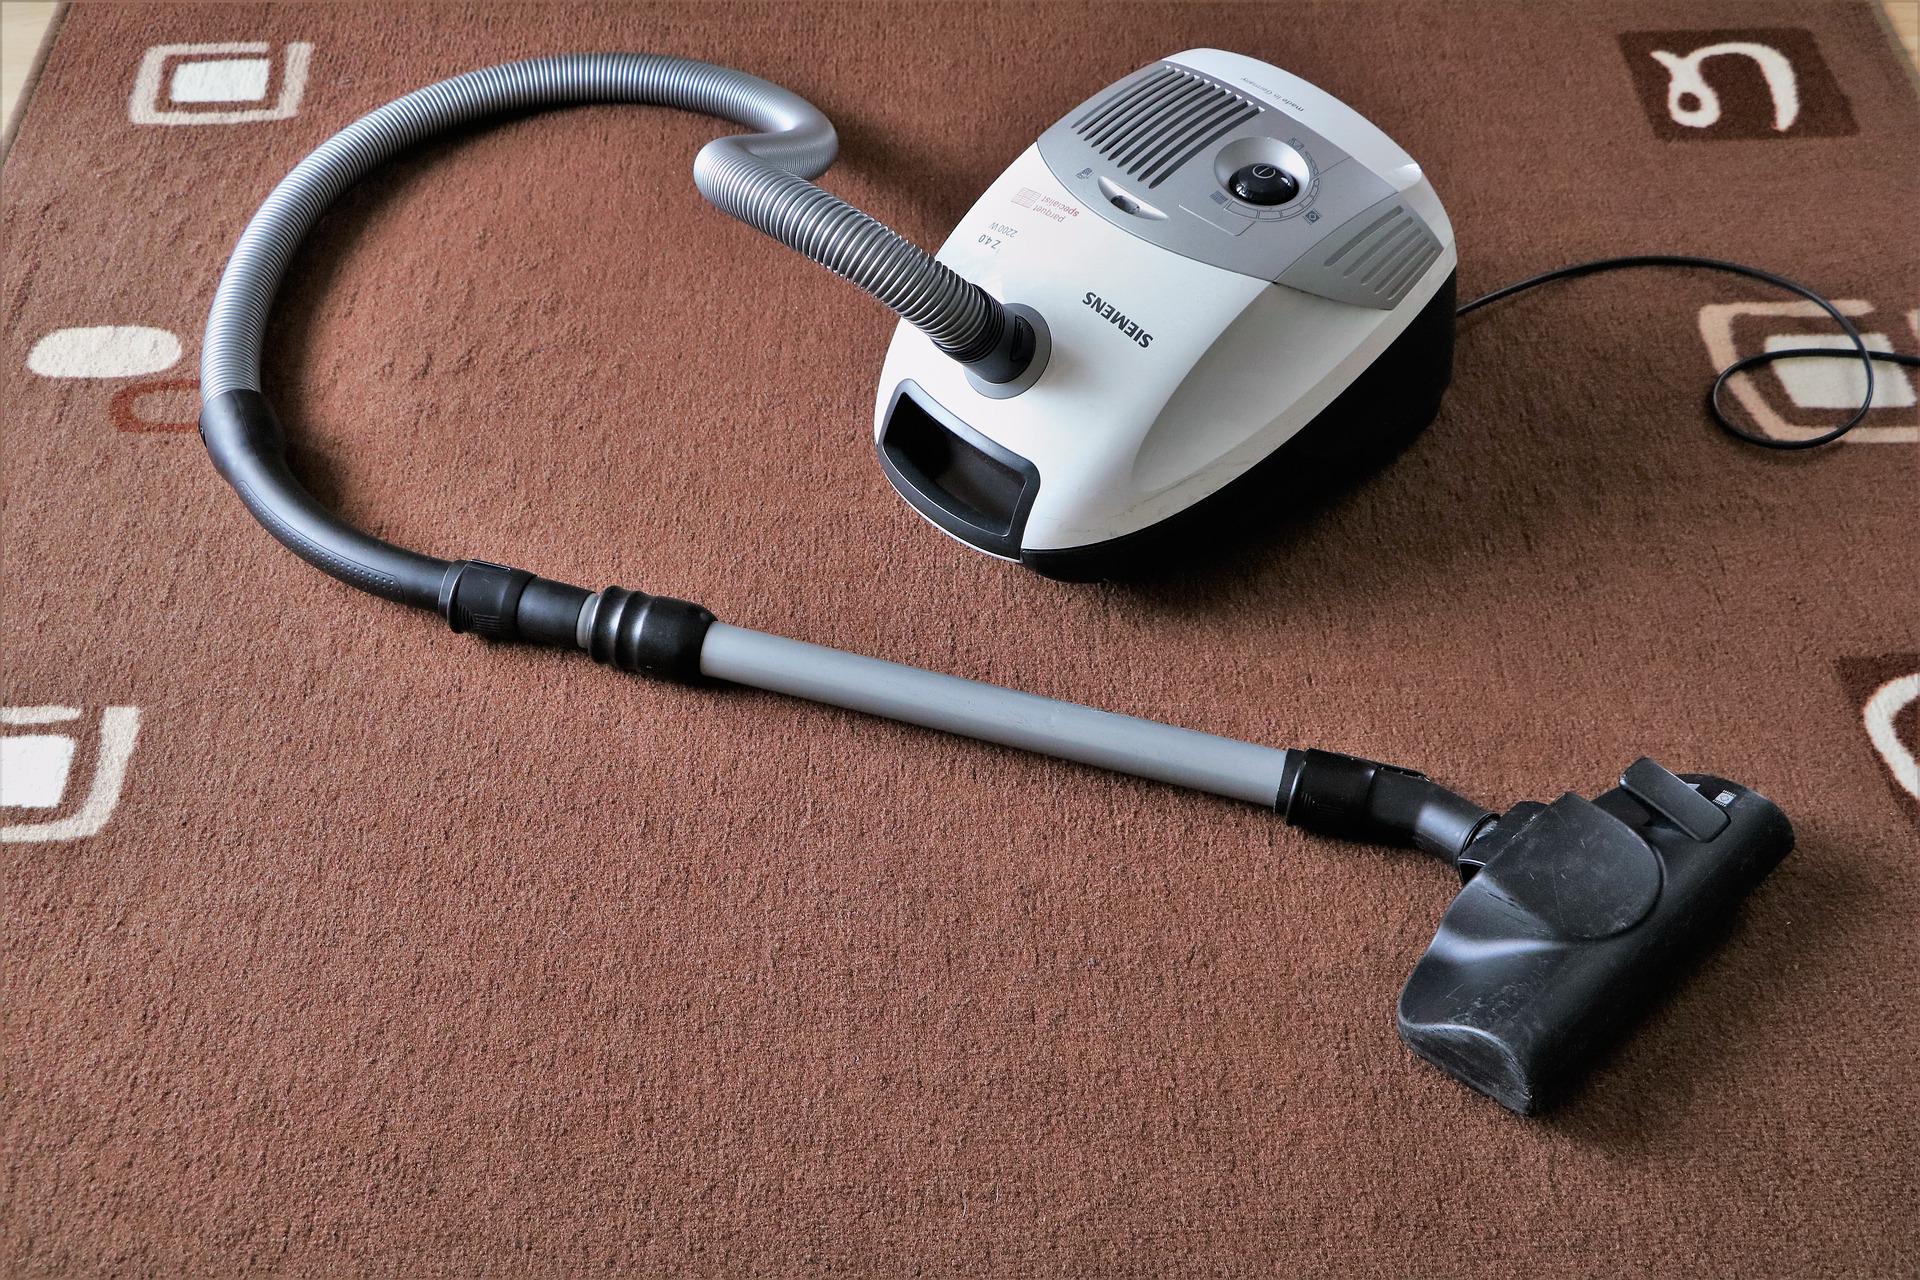 Does a vacuum cleaner need cleaning?